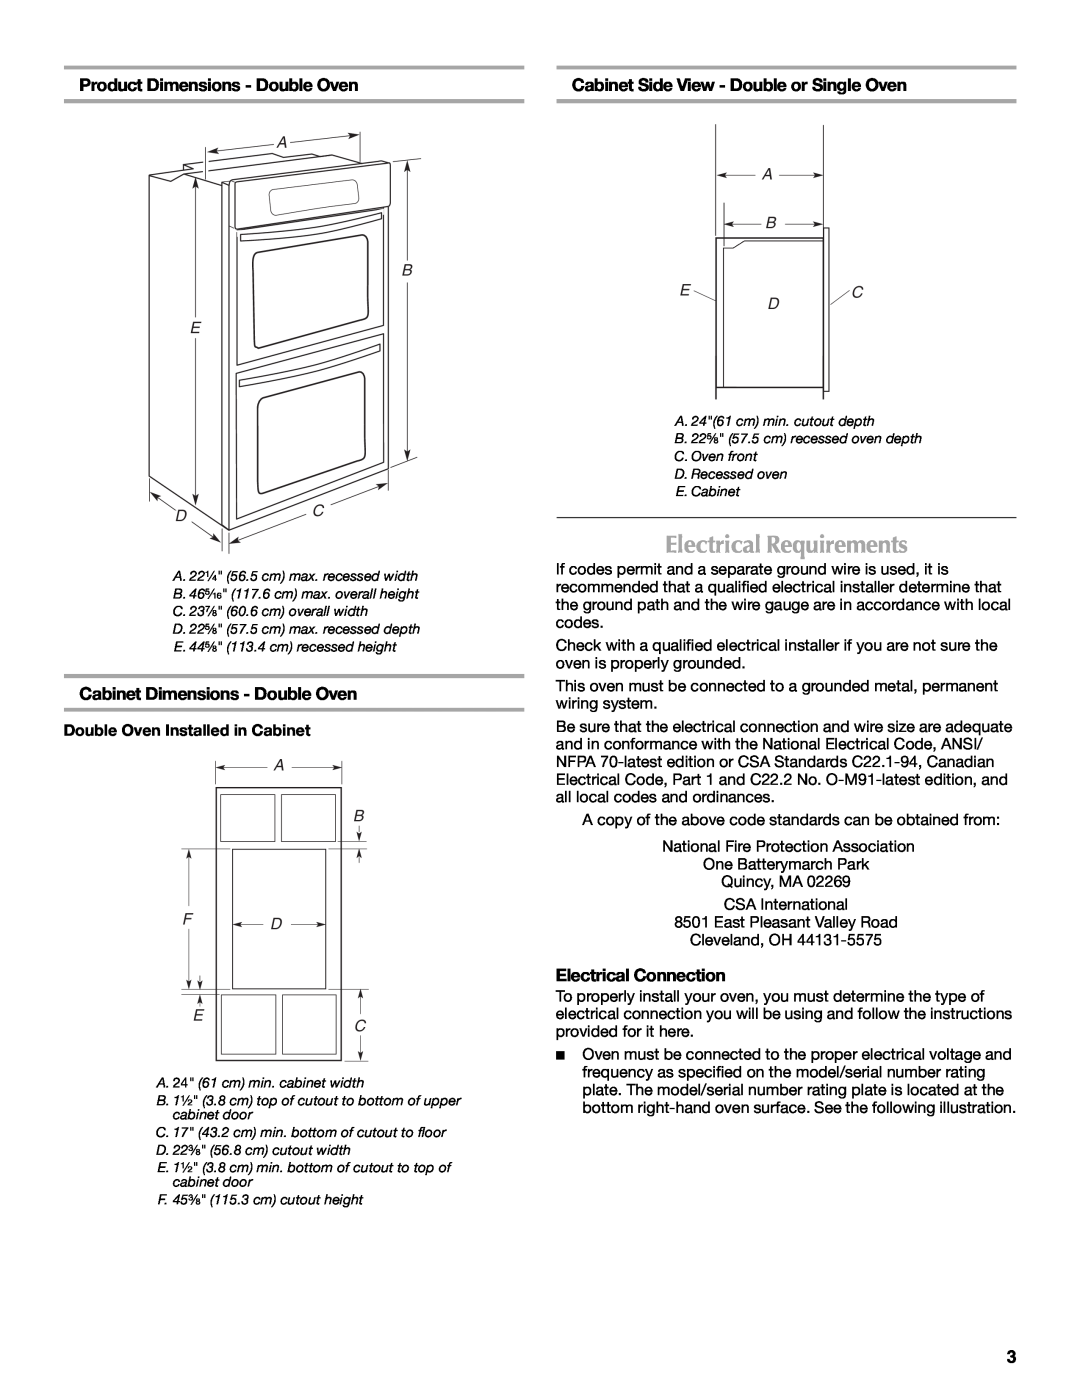 Whirlpool W10203506A Electrical Requirements, Product Dimensions - Double Oven, Cabinet Dimensions - Double Oven, A B E Dc 